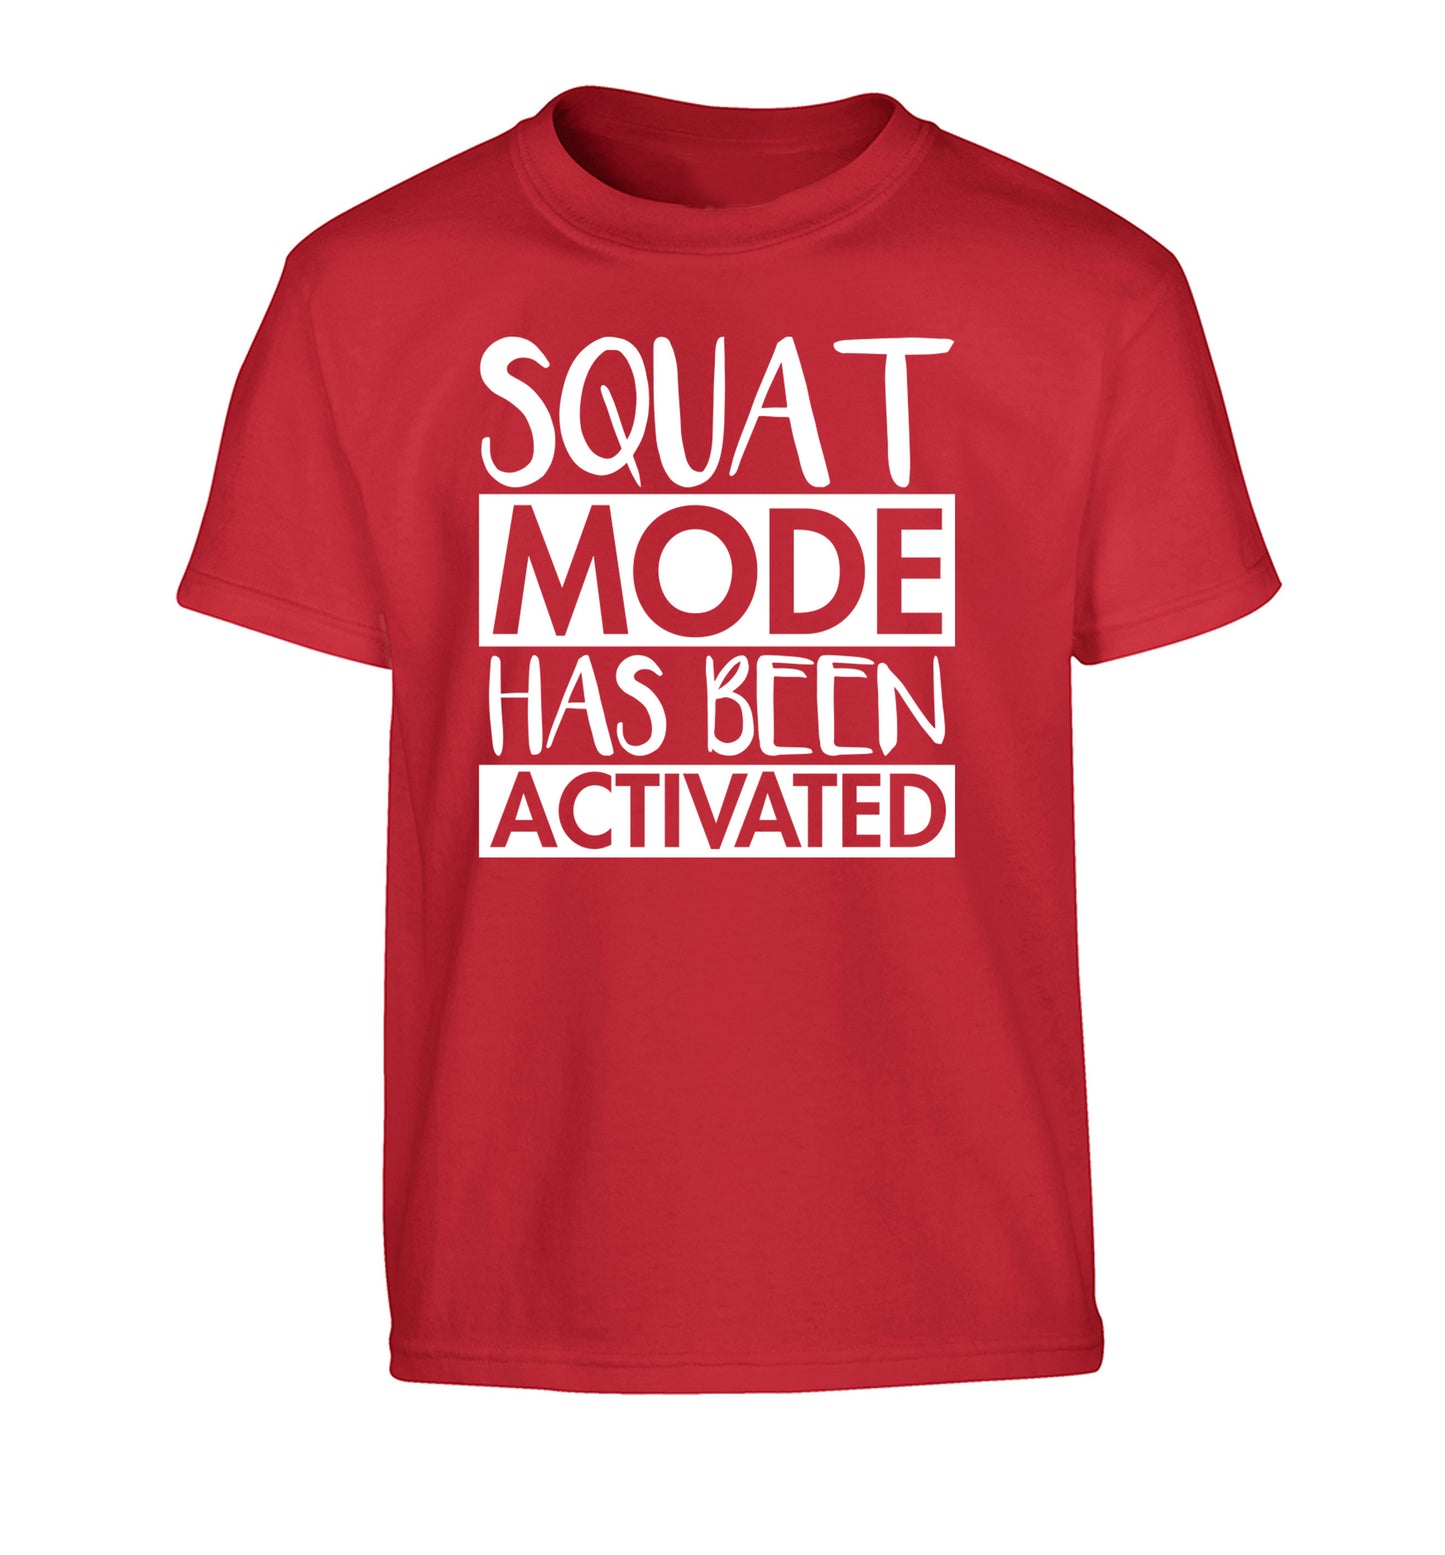 Squat mode activated Children's red Tshirt 12-14 Years